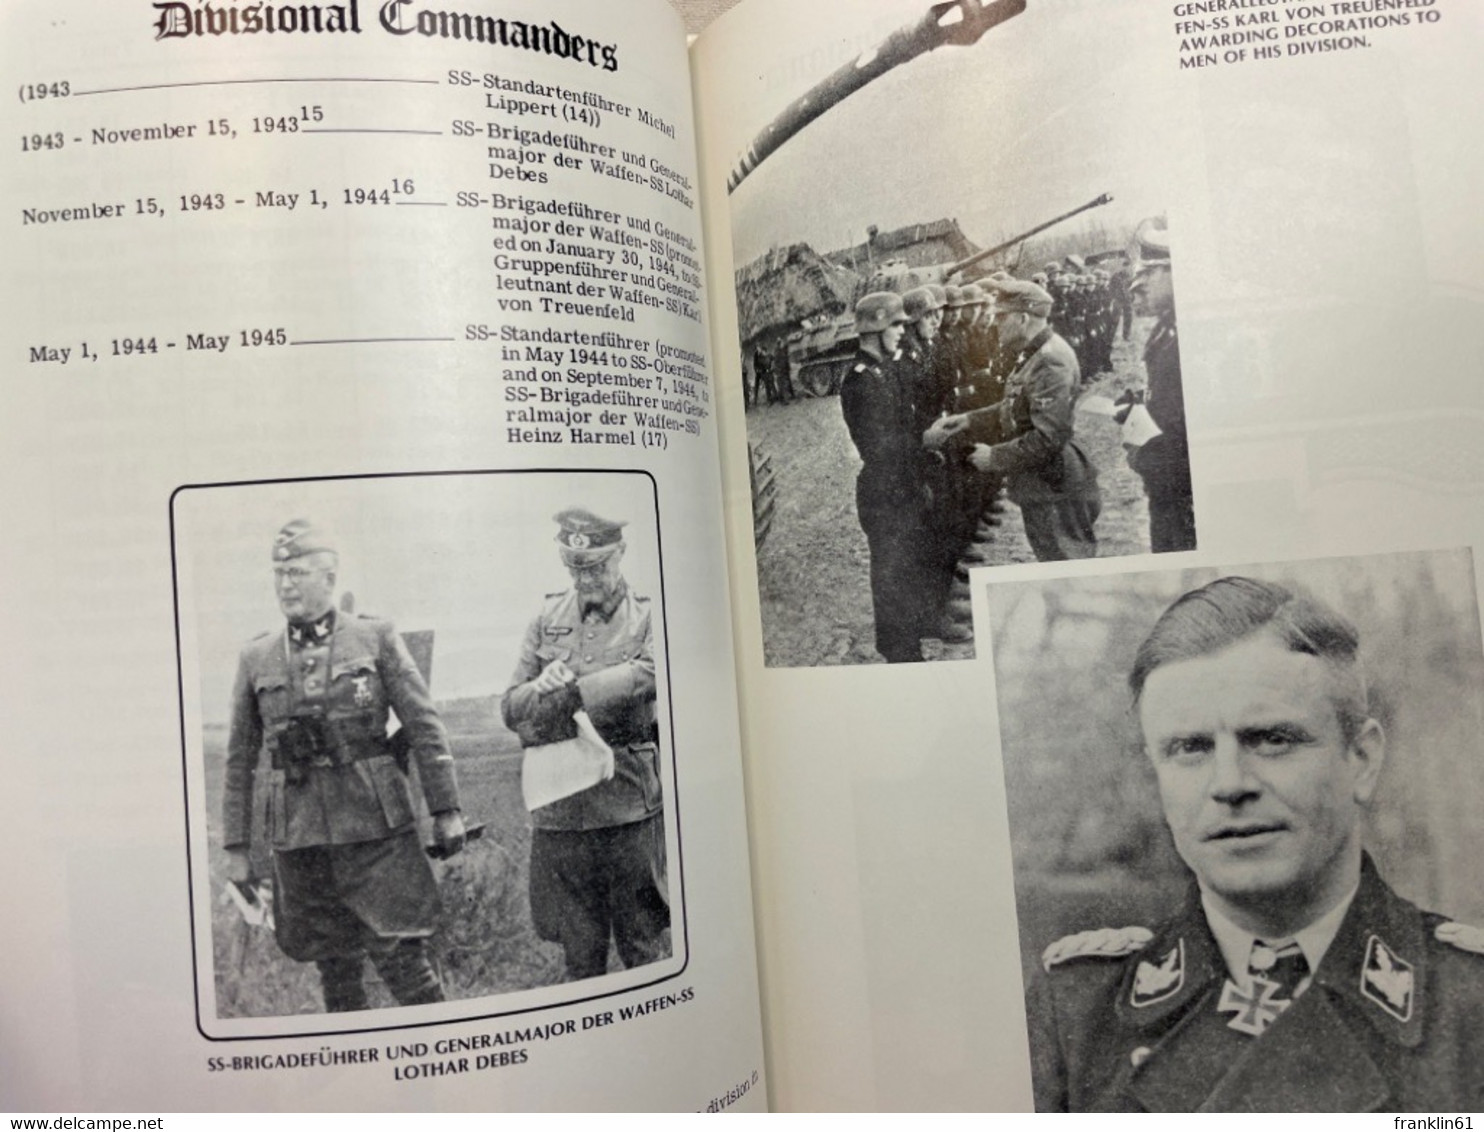 Uniforms, Organization and History of the Waffen-SS.